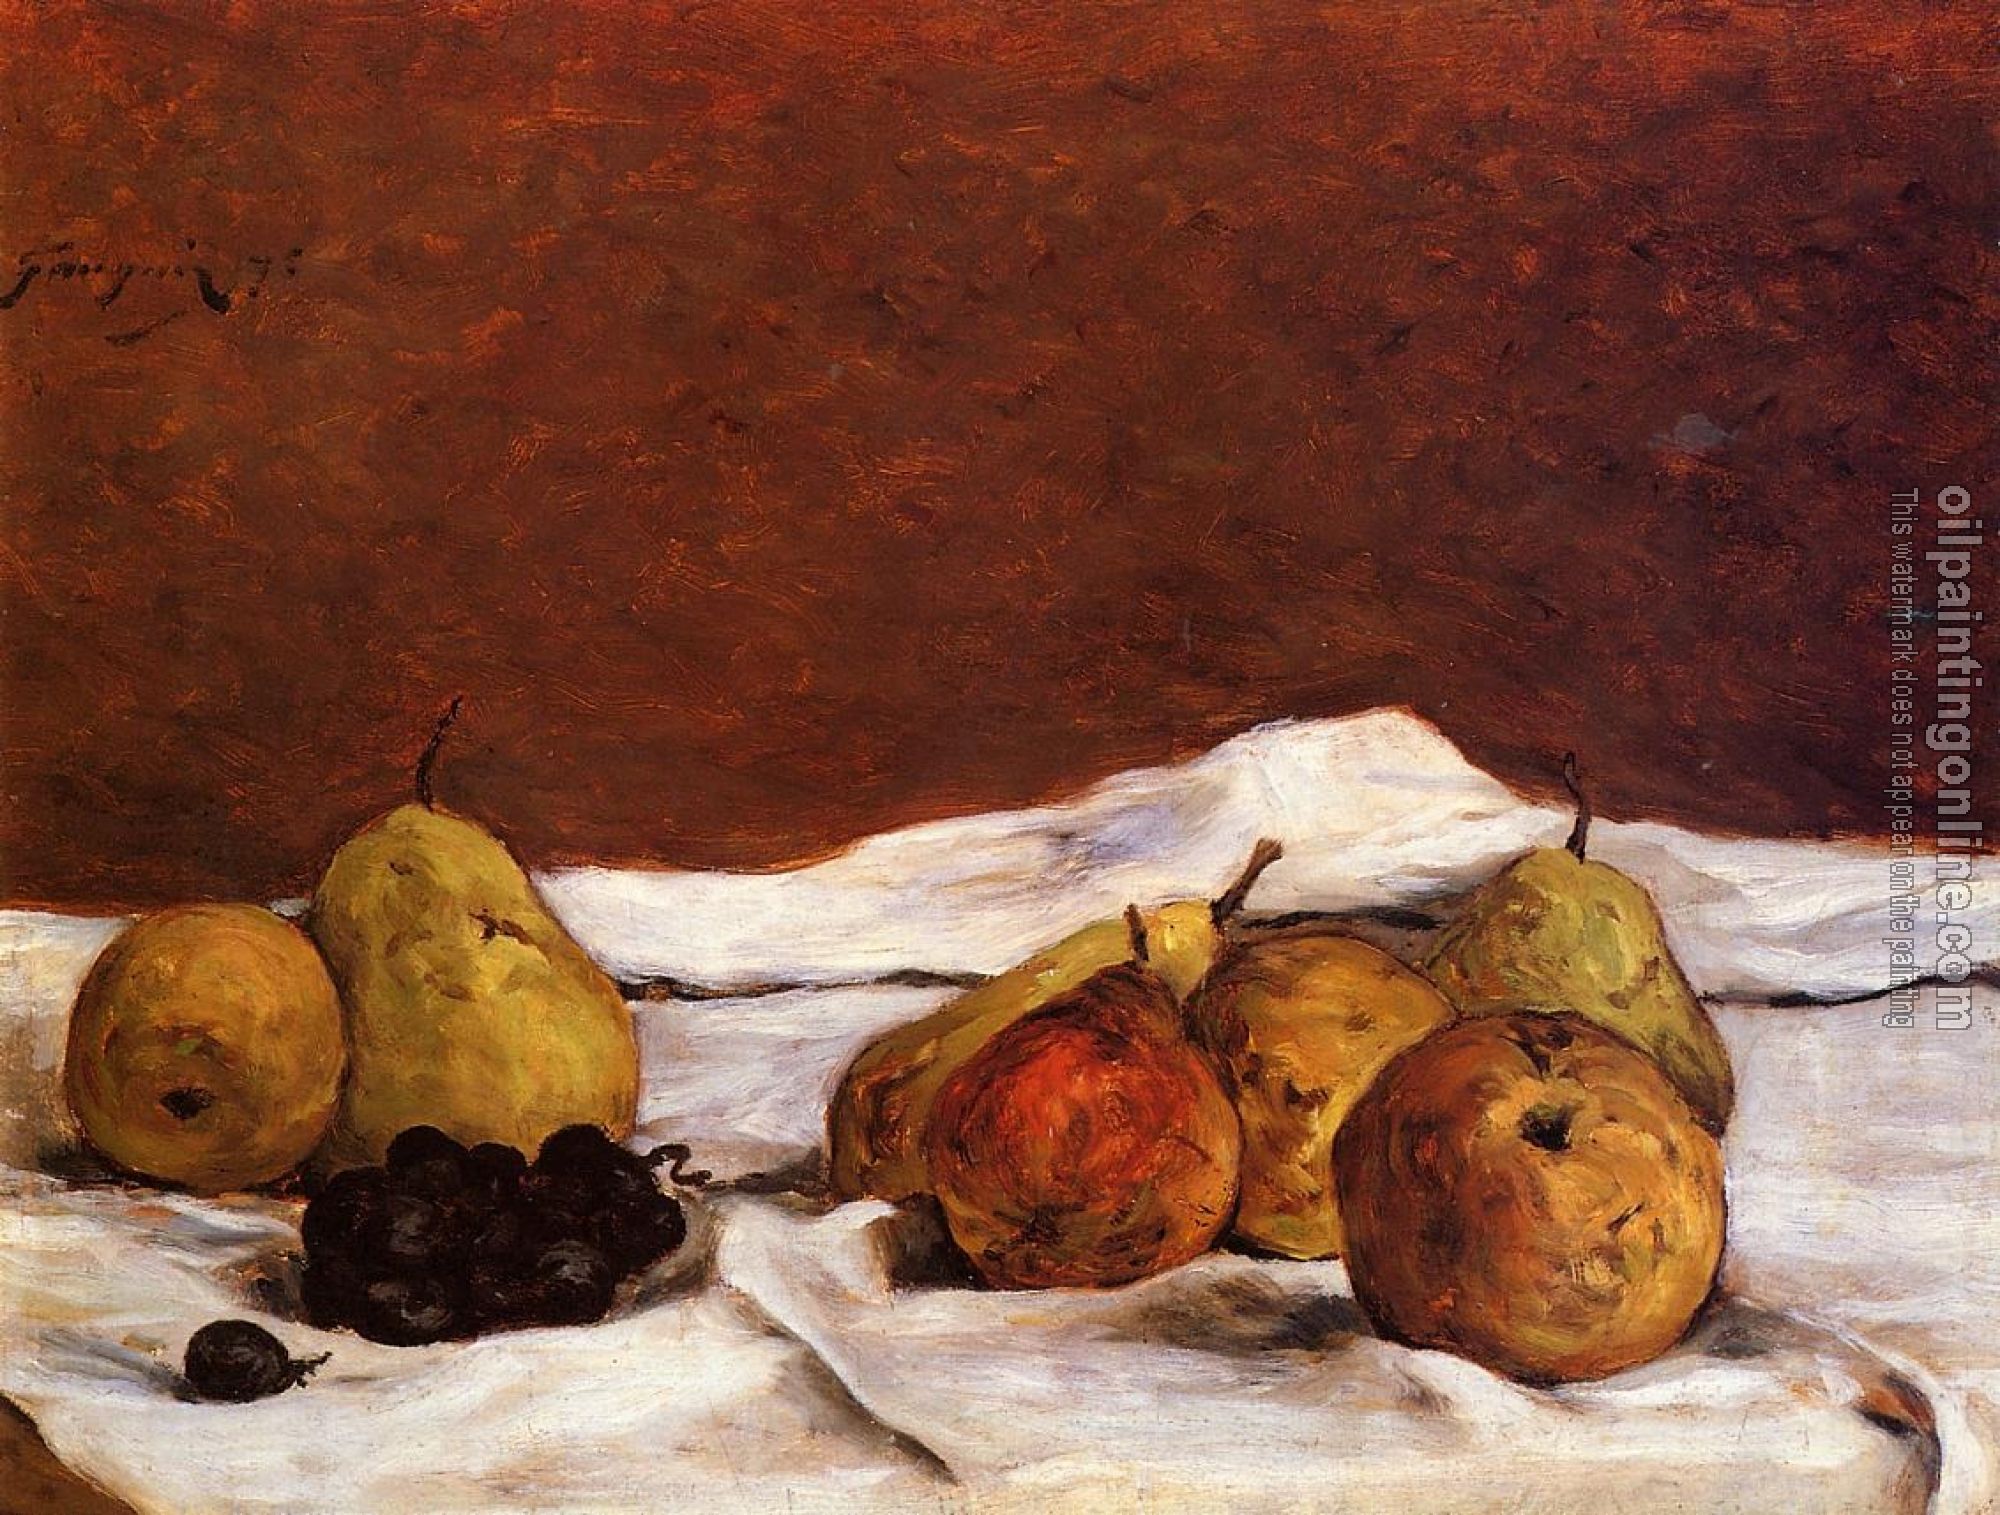 Gauguin, Paul - Pears and Grapes